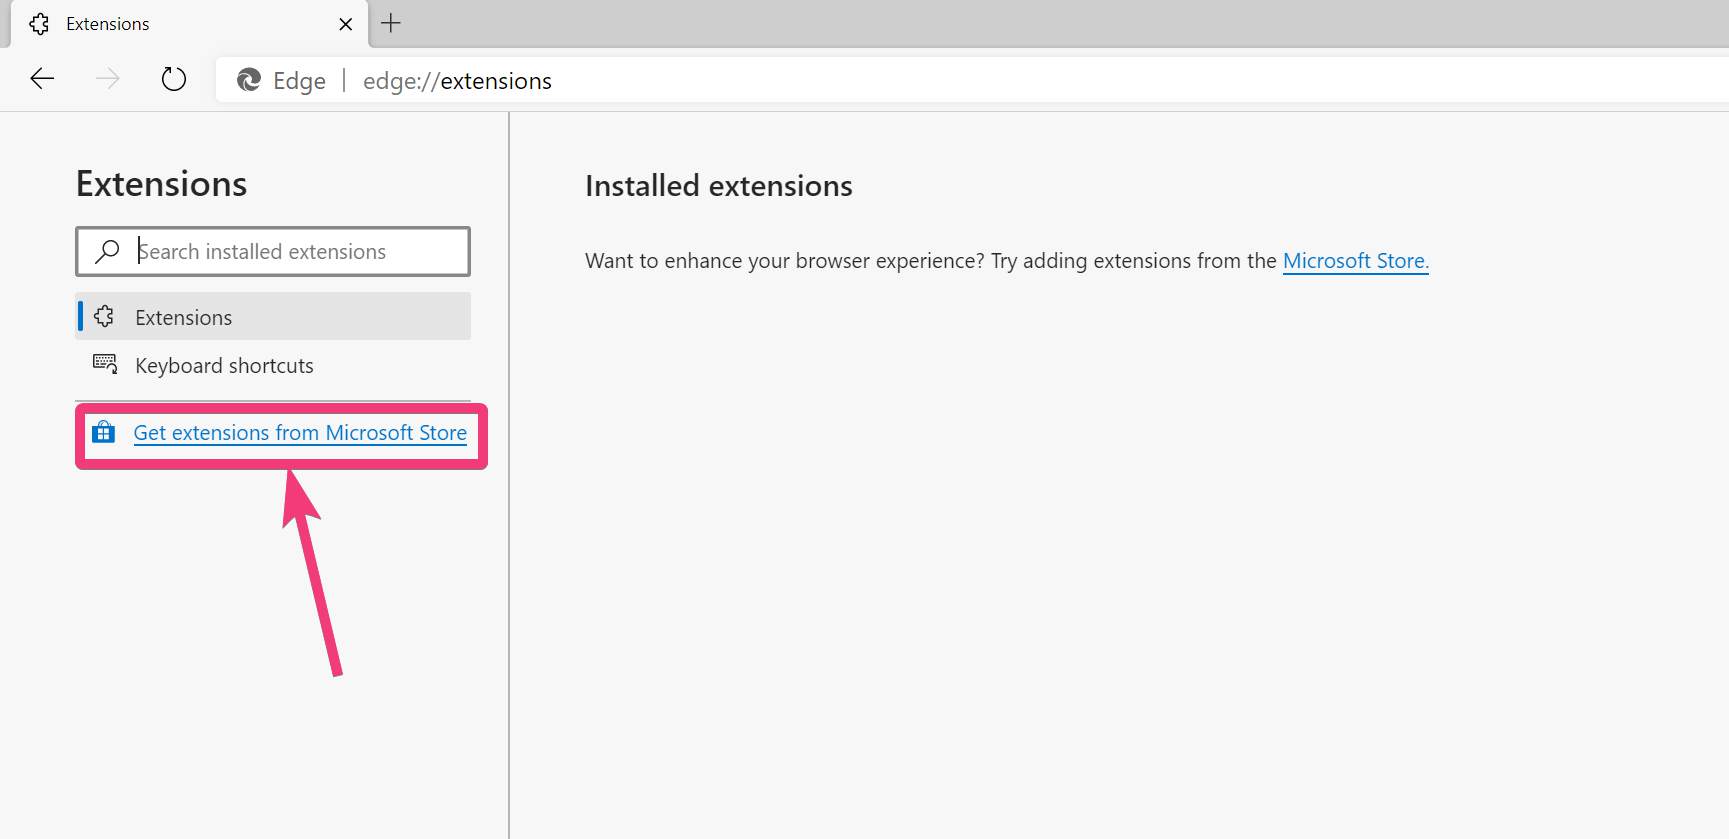 Get extensions from Microsoft Store